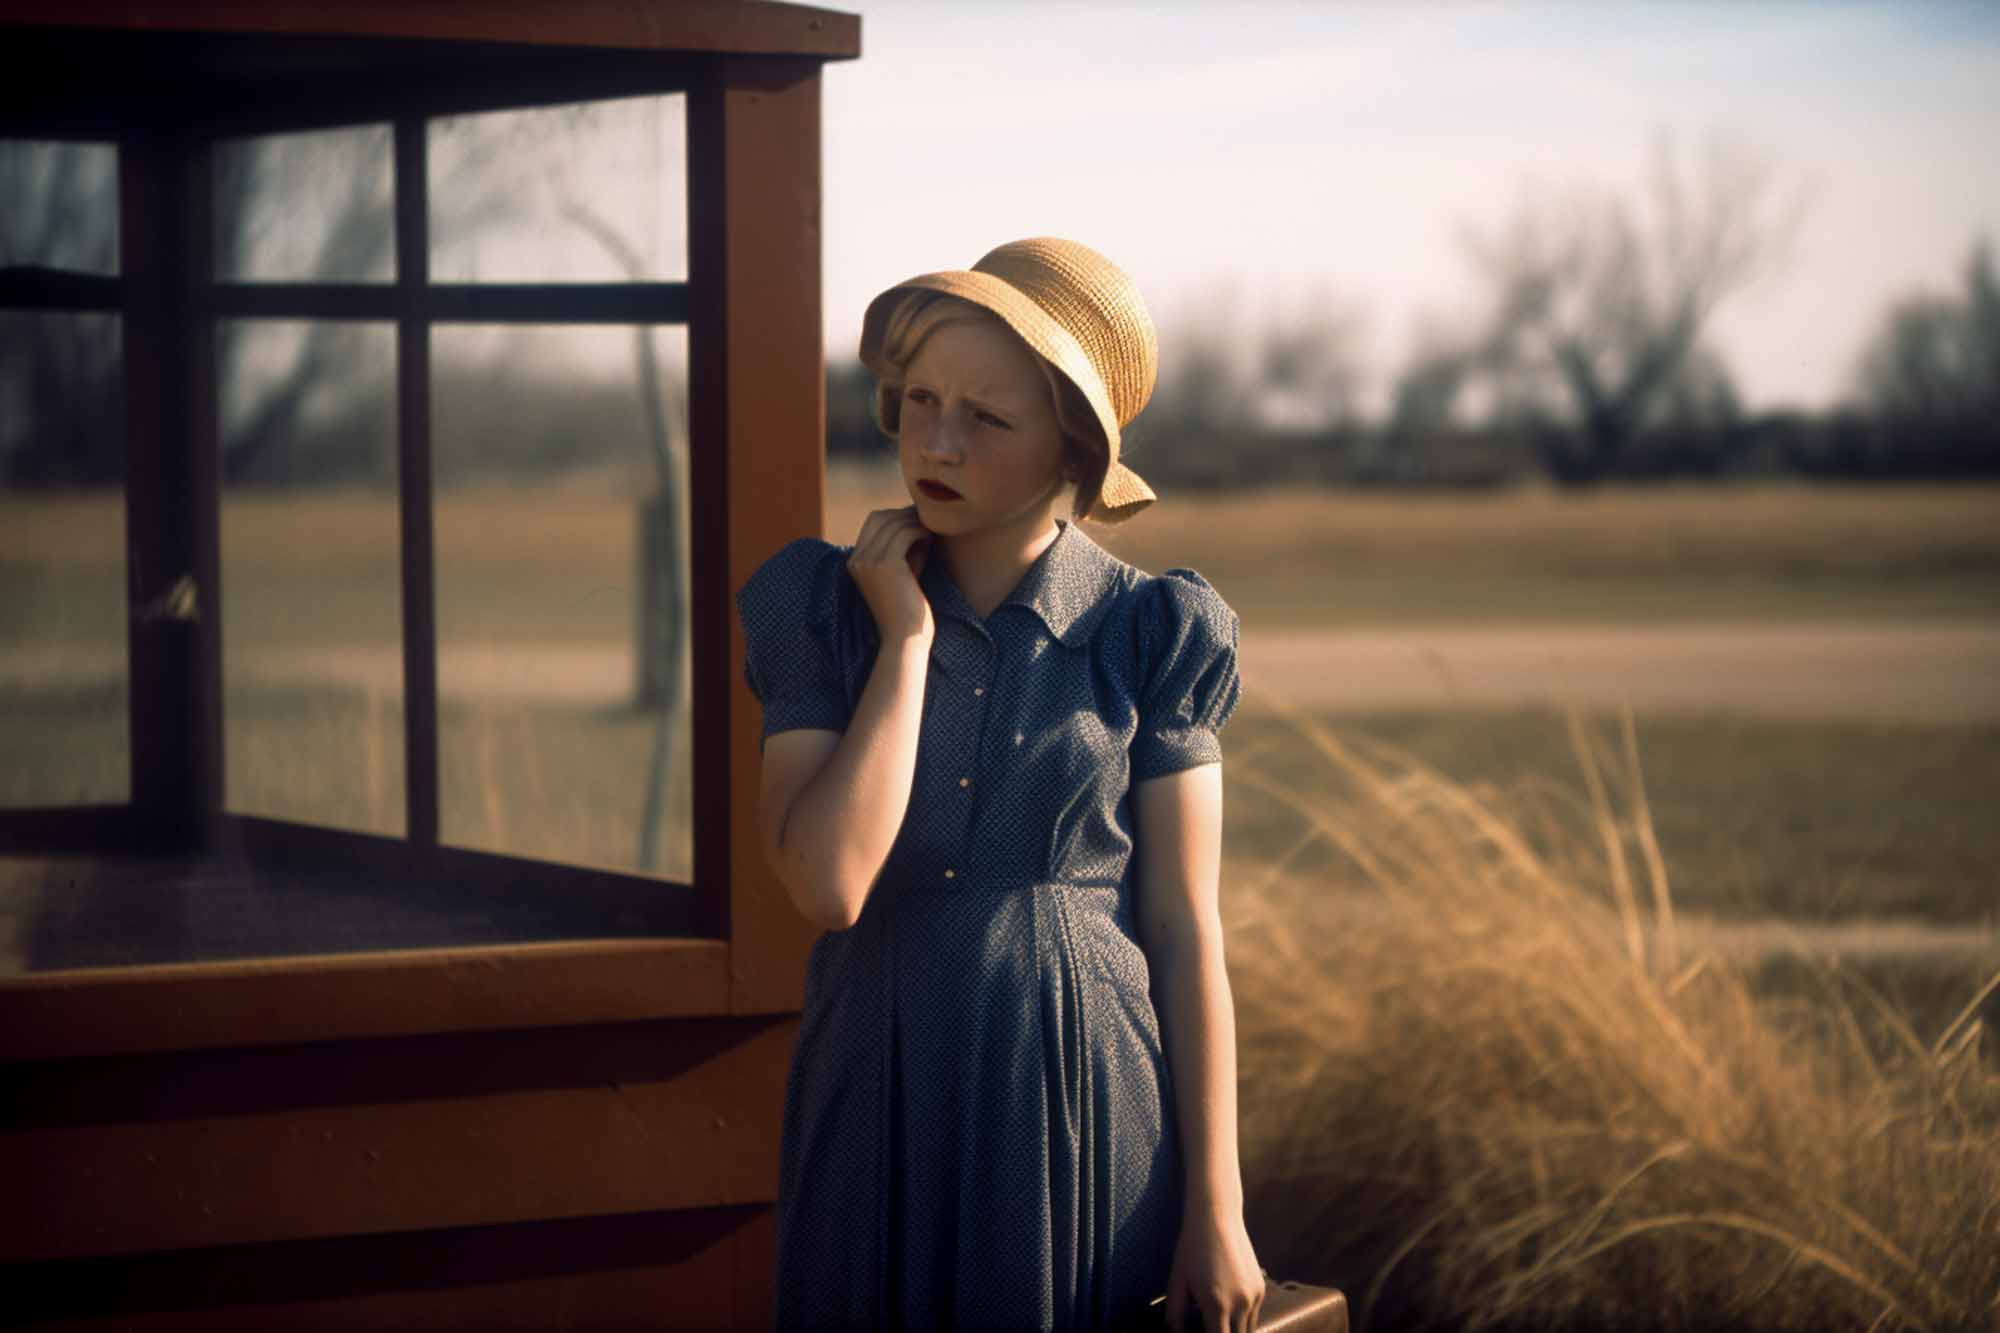 zavesmith_she_is_wearing_the_clothing_of_a_farmer_girl_in_1950__c2af39a2-2330-419c-9a45-e32e86104e5e